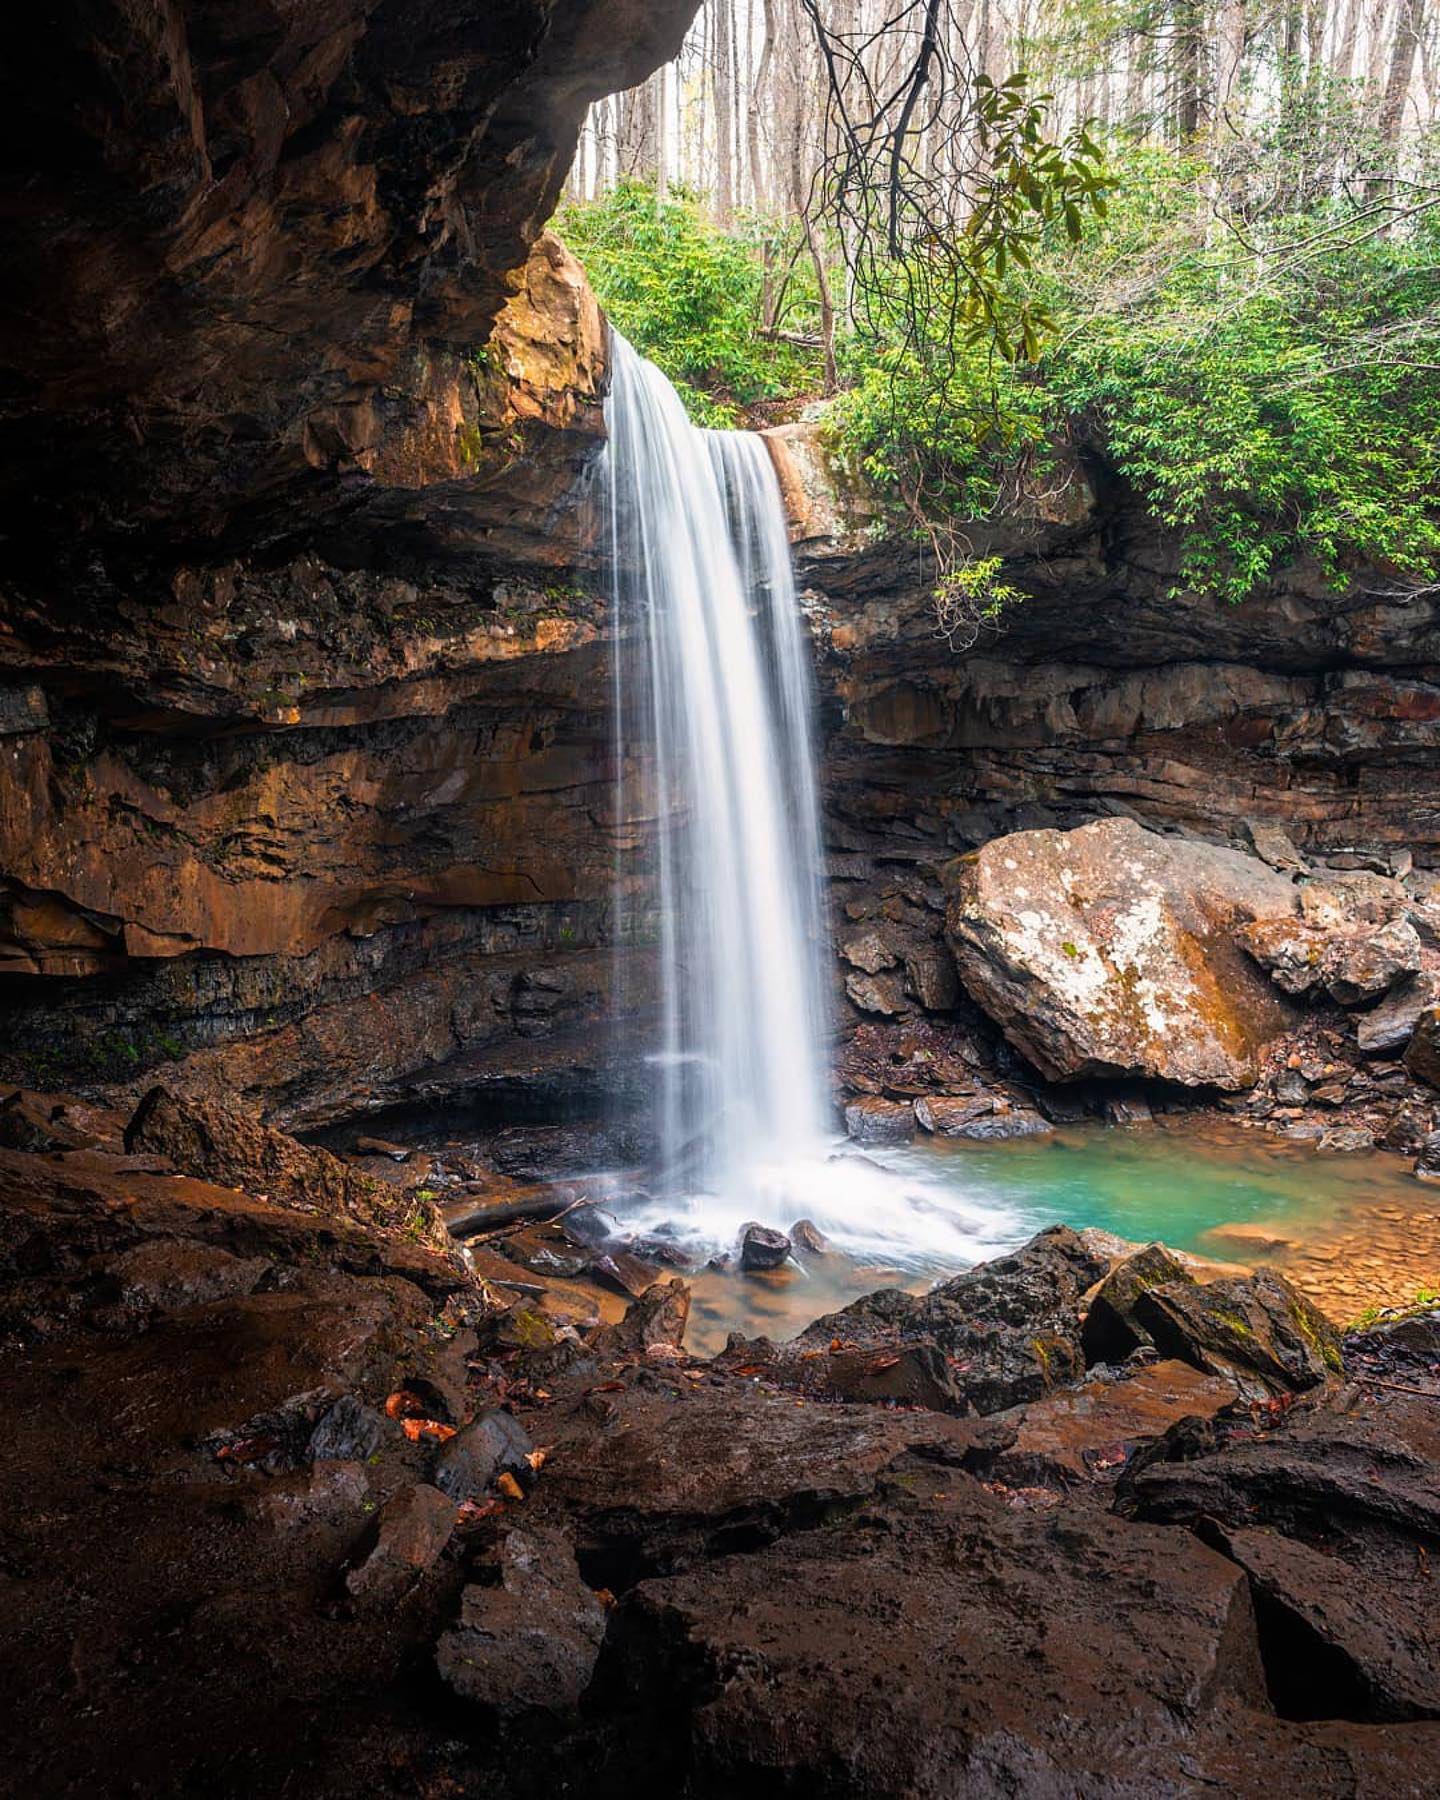 Cucumber Falls along the Great Gorge Trail in Ohiopyle State Park